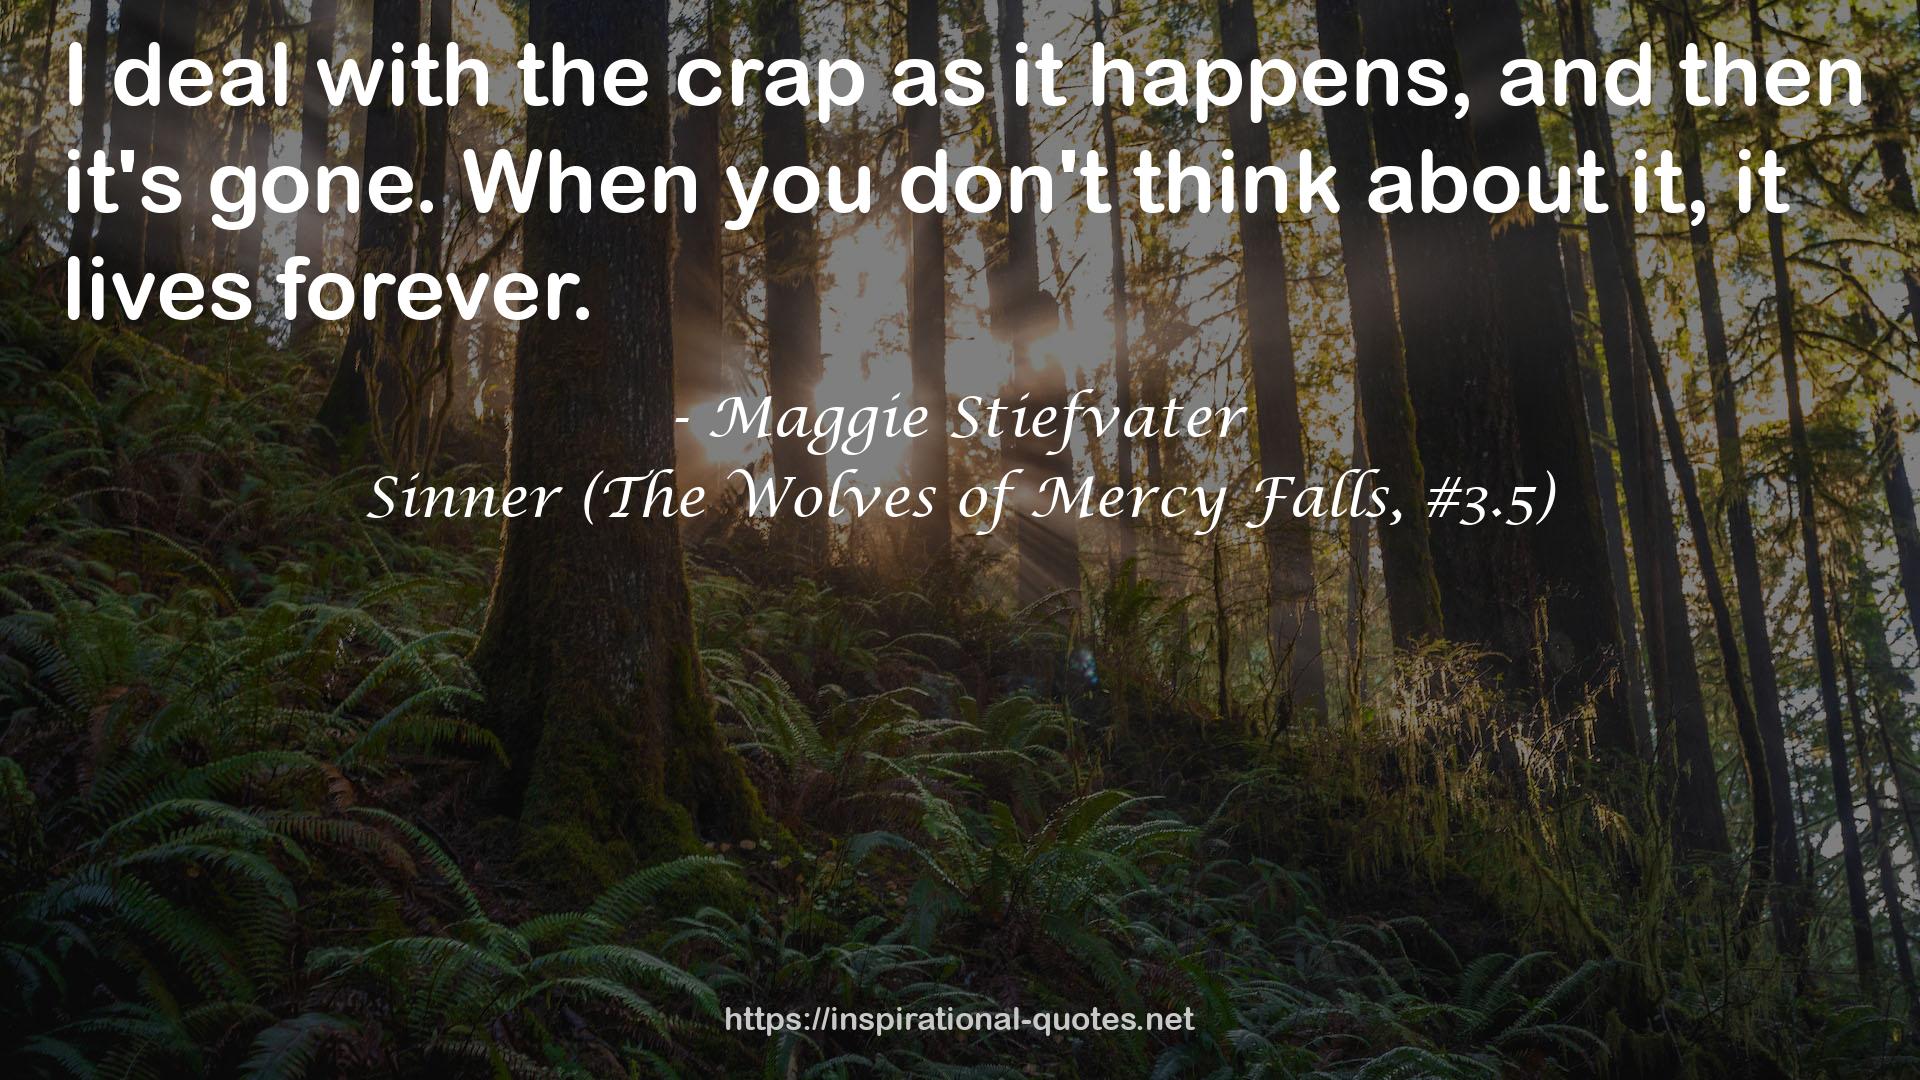 Sinner (The Wolves of Mercy Falls, #3.5) QUOTES